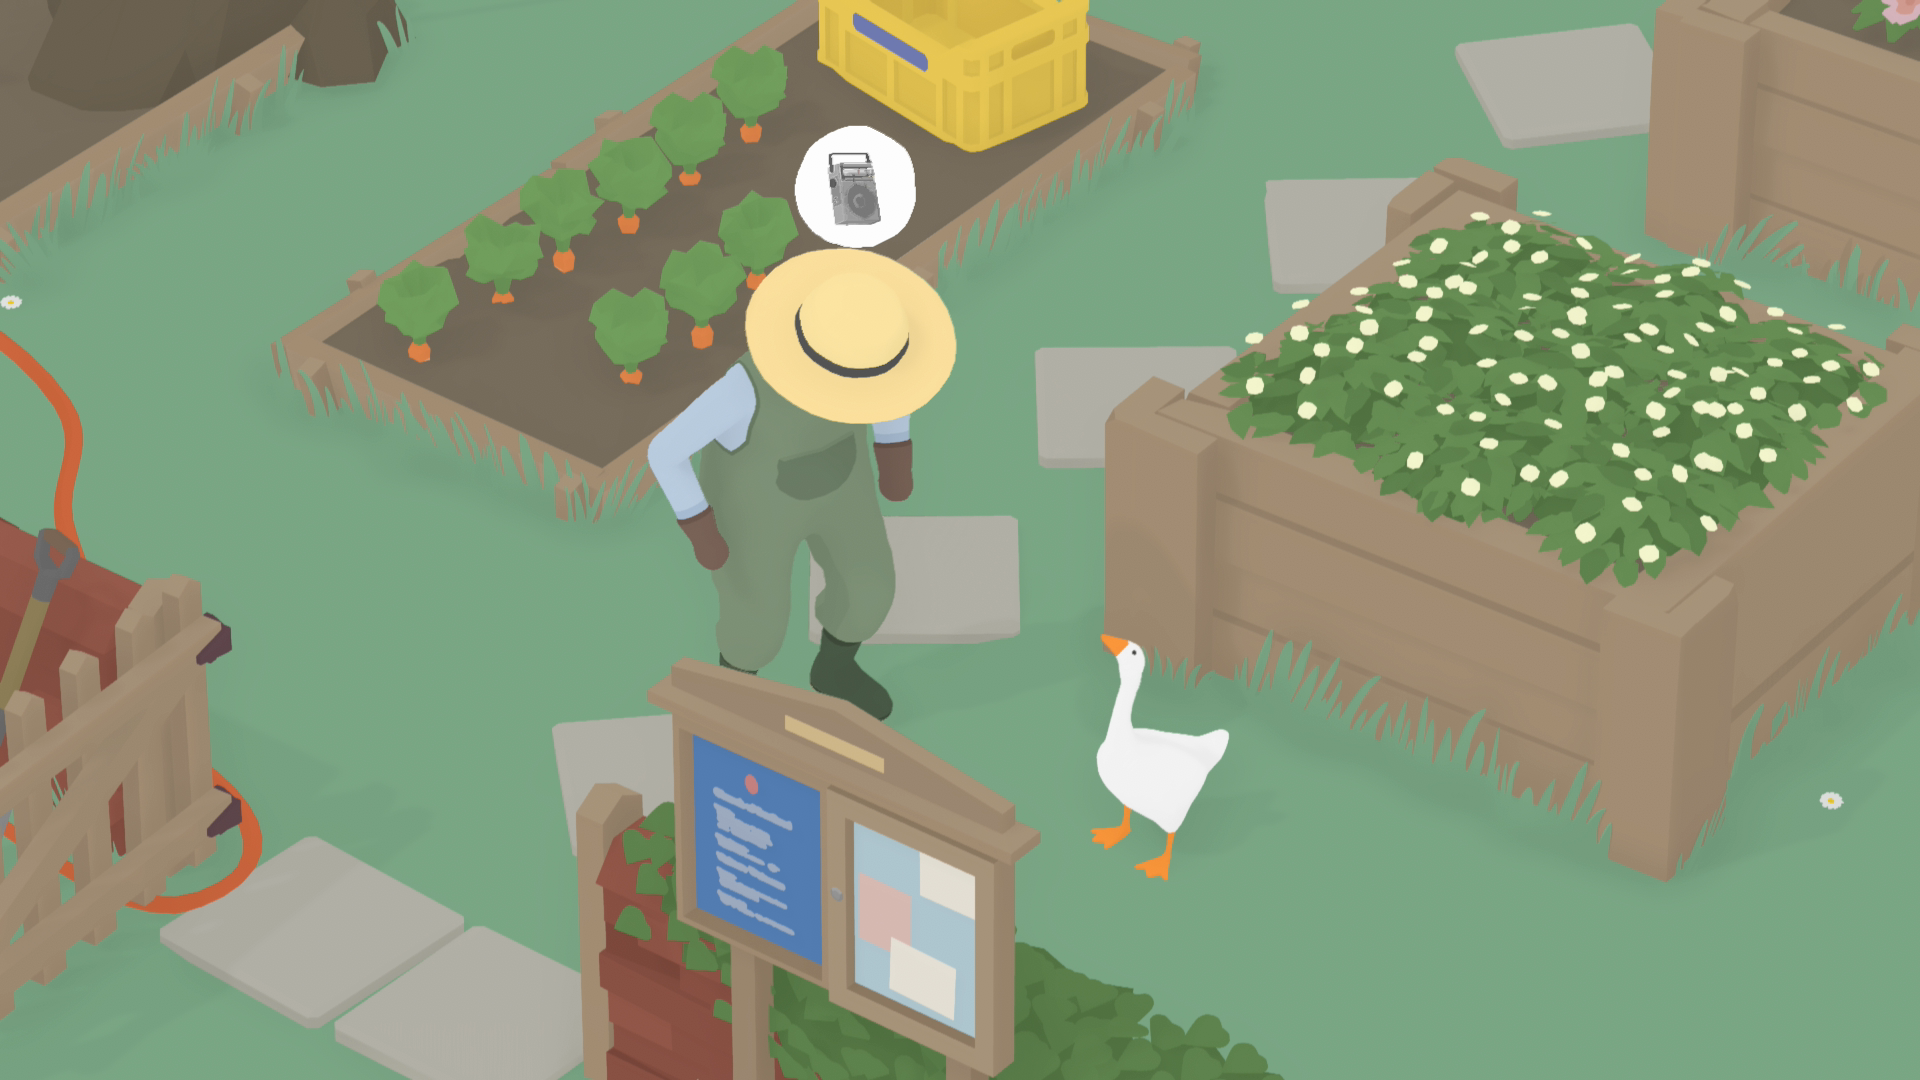 Untitled Goose Game Exceeds 1 Million Copies Sold